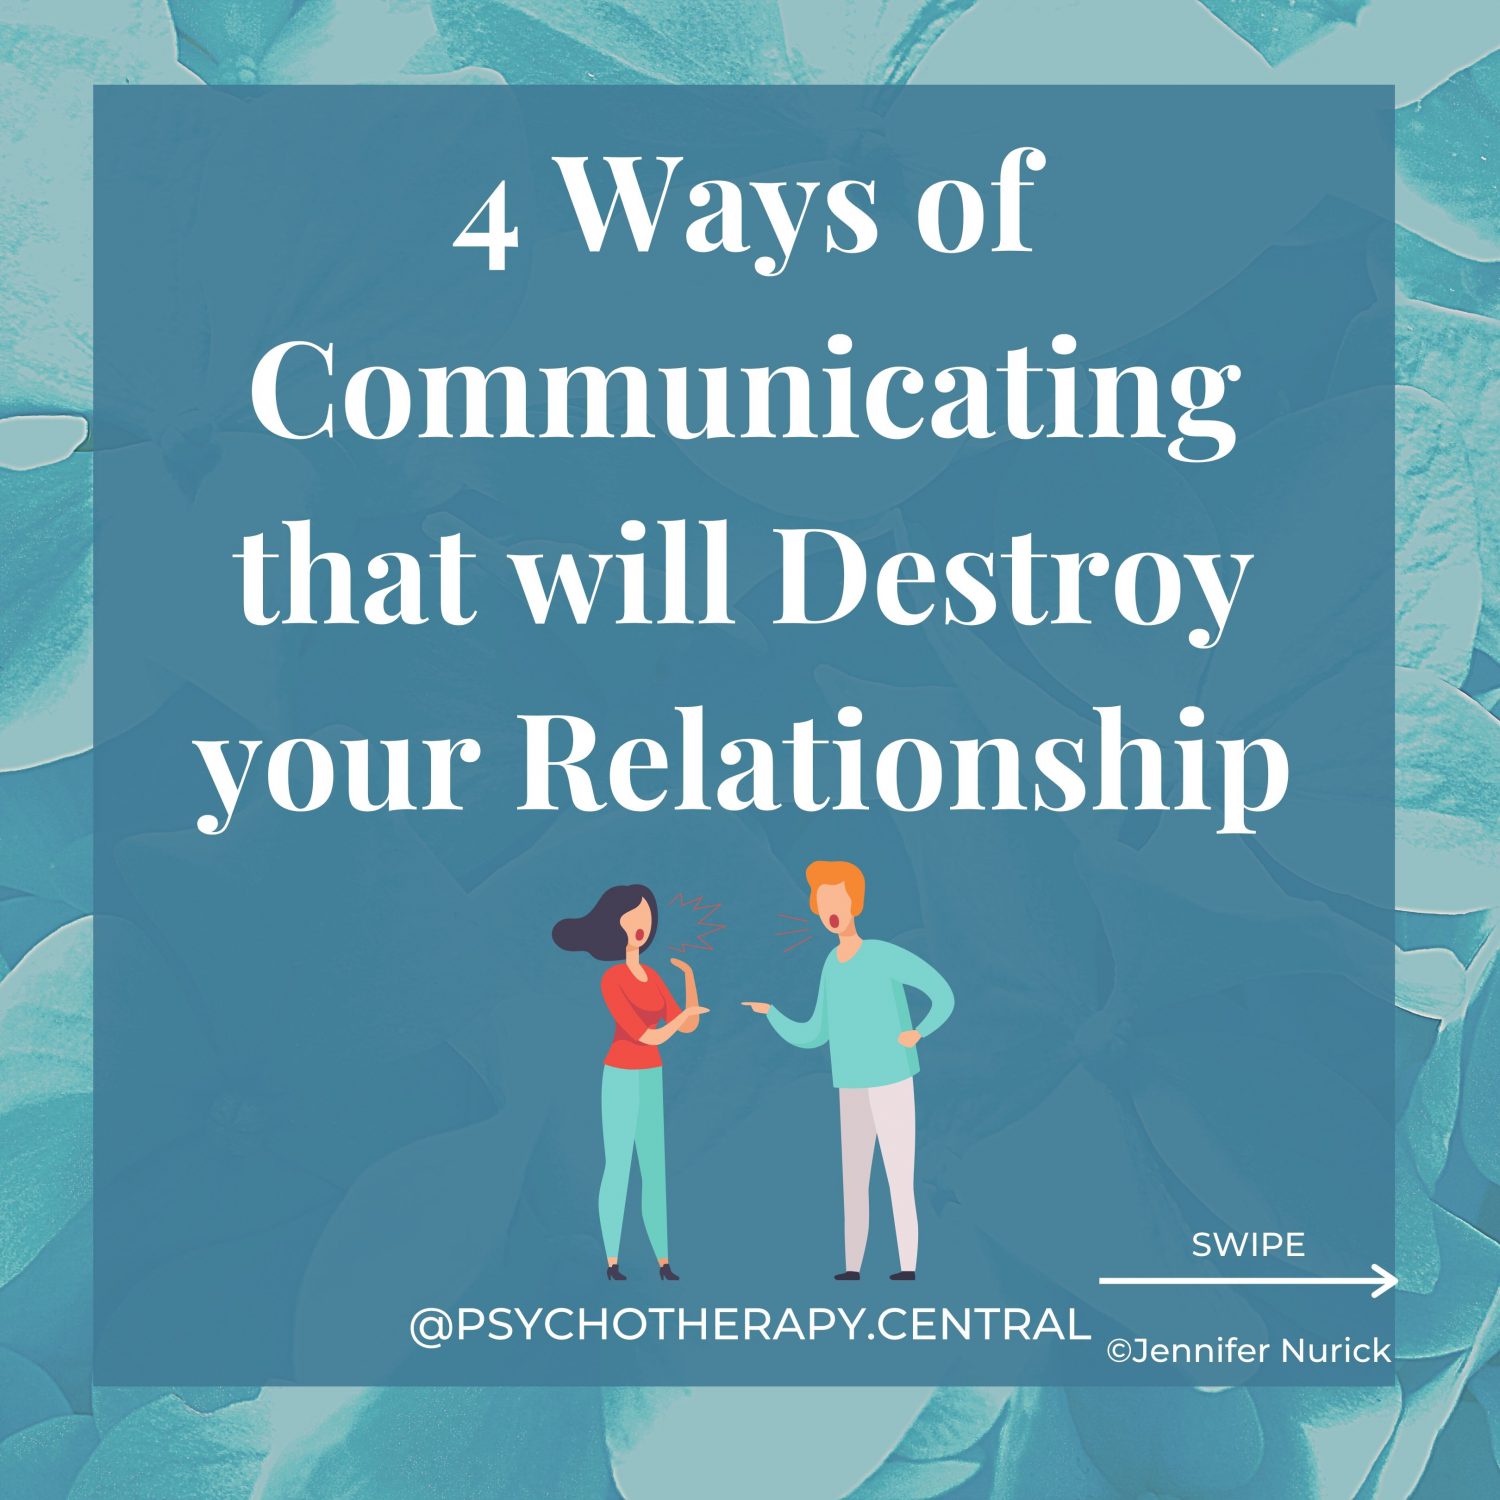 4 Ways of Communicating that will Destroy your Relationship